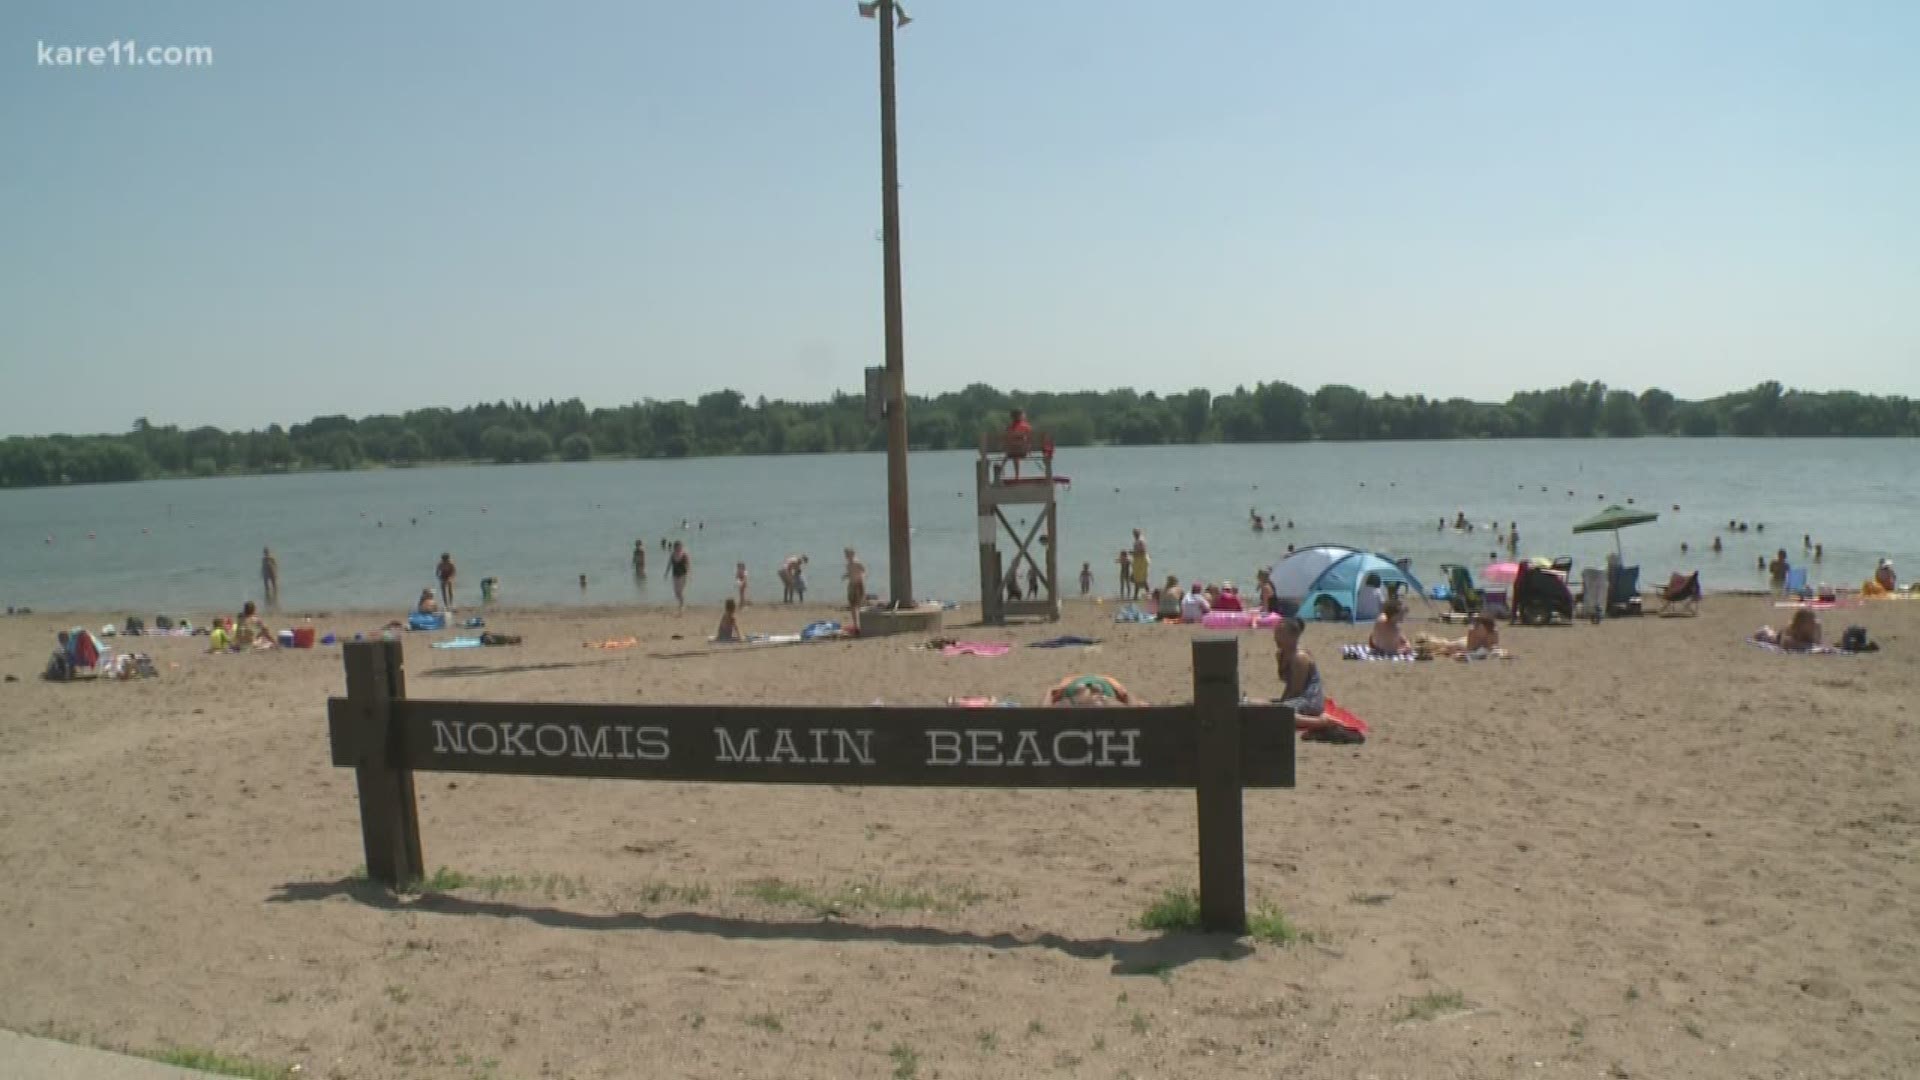 Ahead of Memorial Day, water safety is paramount, especially with water temperatures still chilly from the long winter.